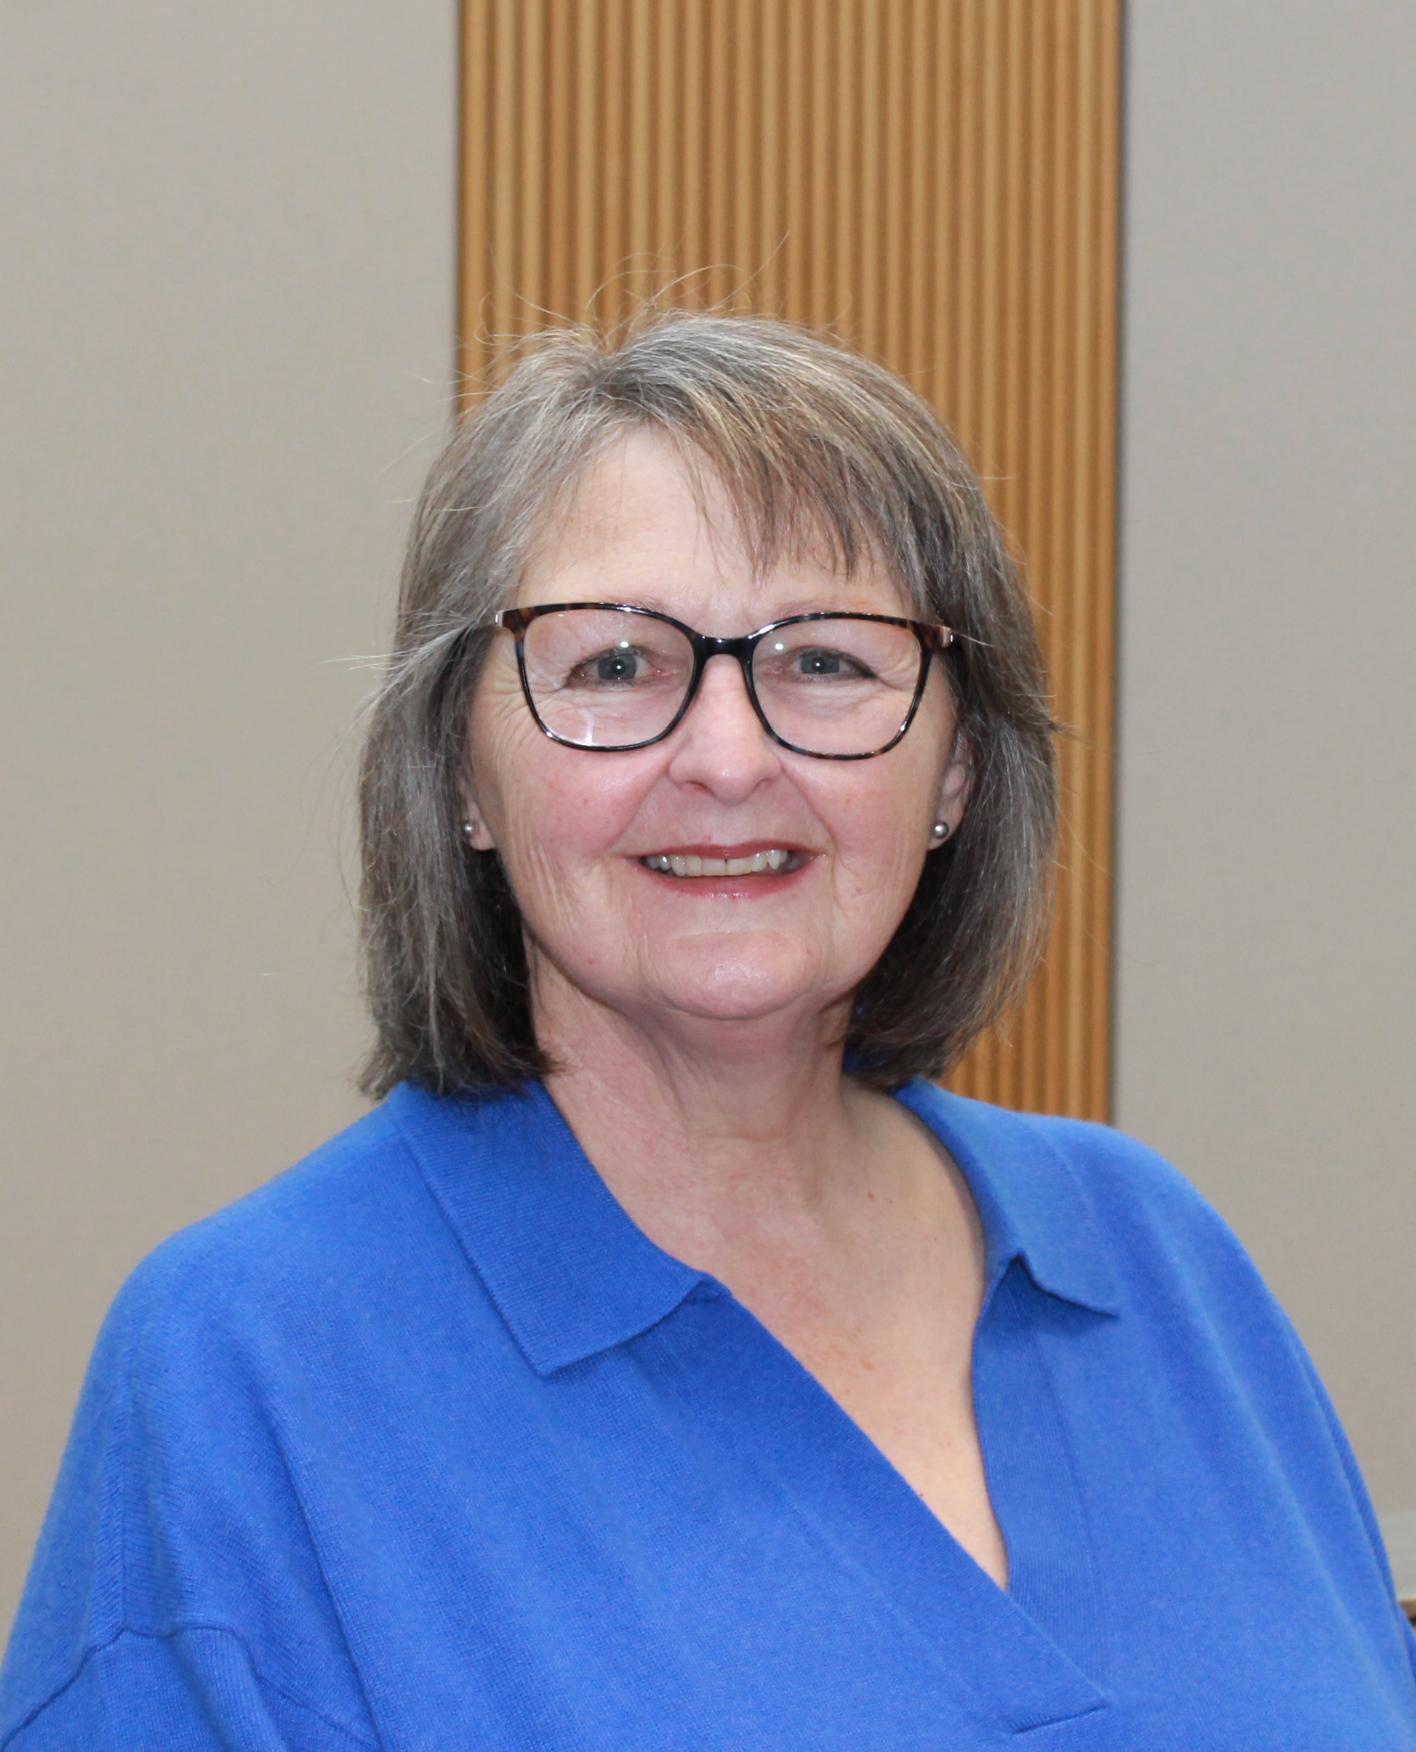 Donna Young, a white woman with grey hair and glasses, wearing a blue shirt.